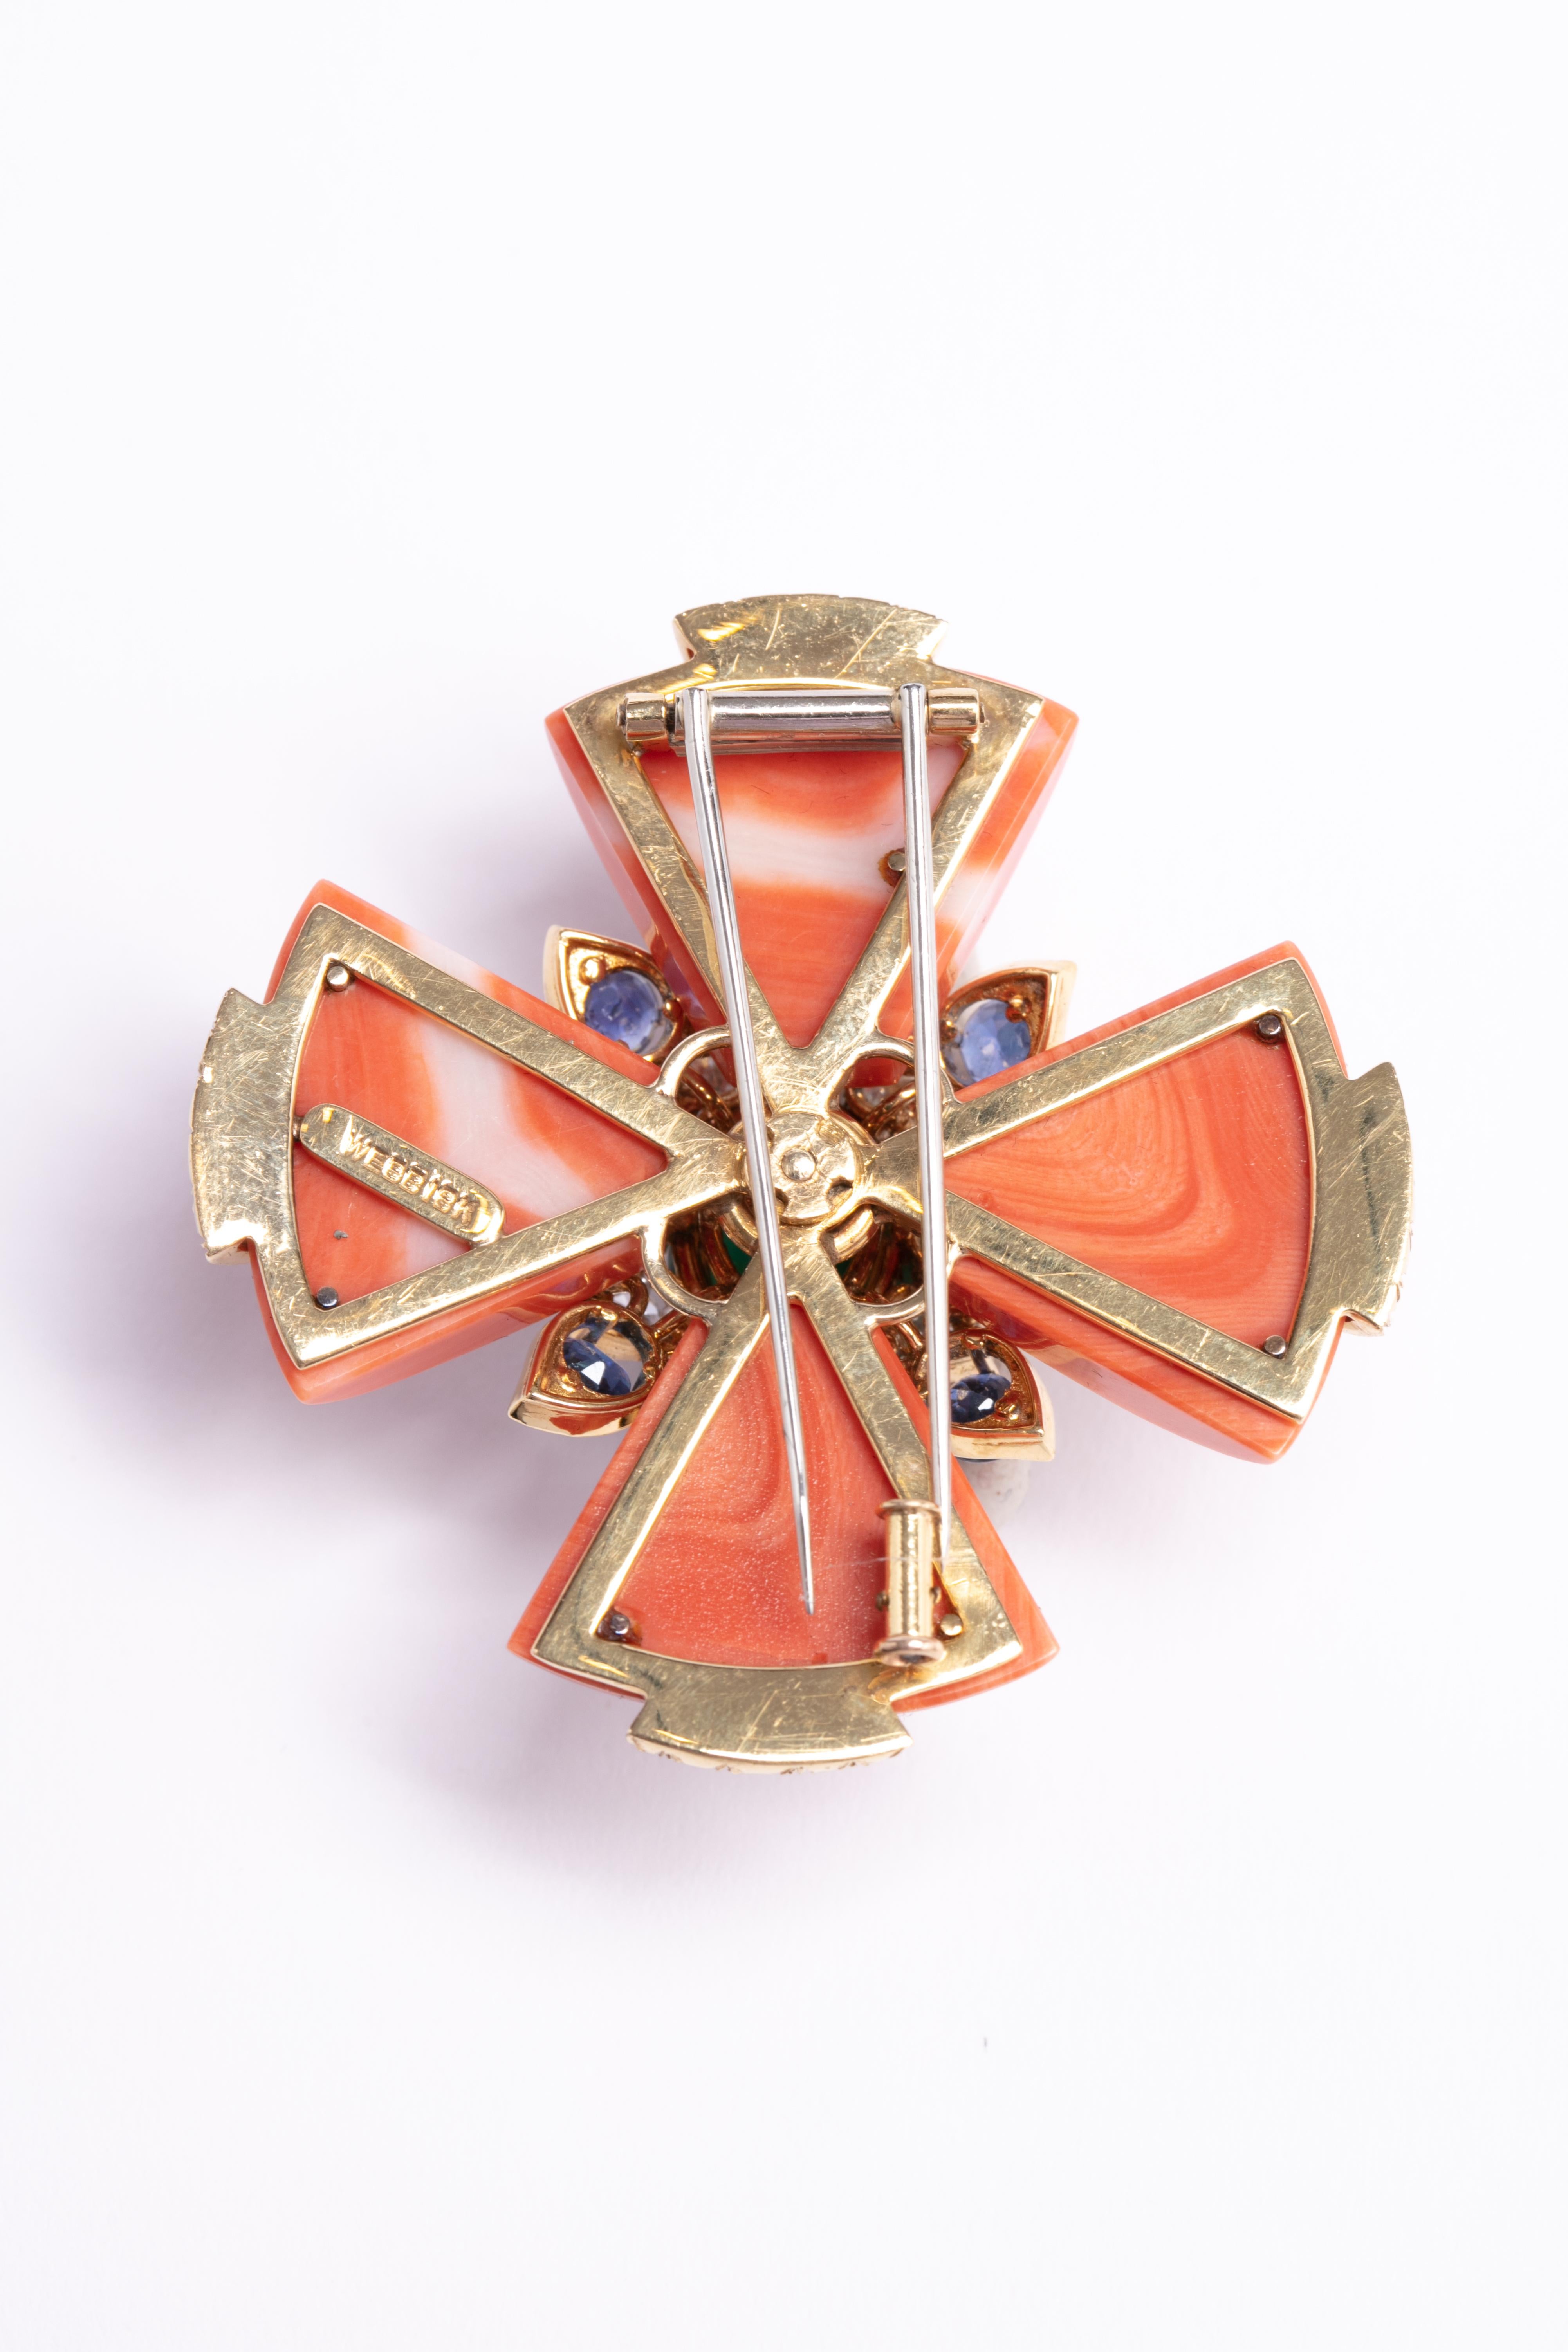 Iconic David Webb coral Maltese cross pendant with diamonds and sapphires surrounding a gorgeous emerald in the center of this show stopping pendant / brooch.
4 individual pieces of coral with 4 well colored sapphires and 84 diamonds surrounding the